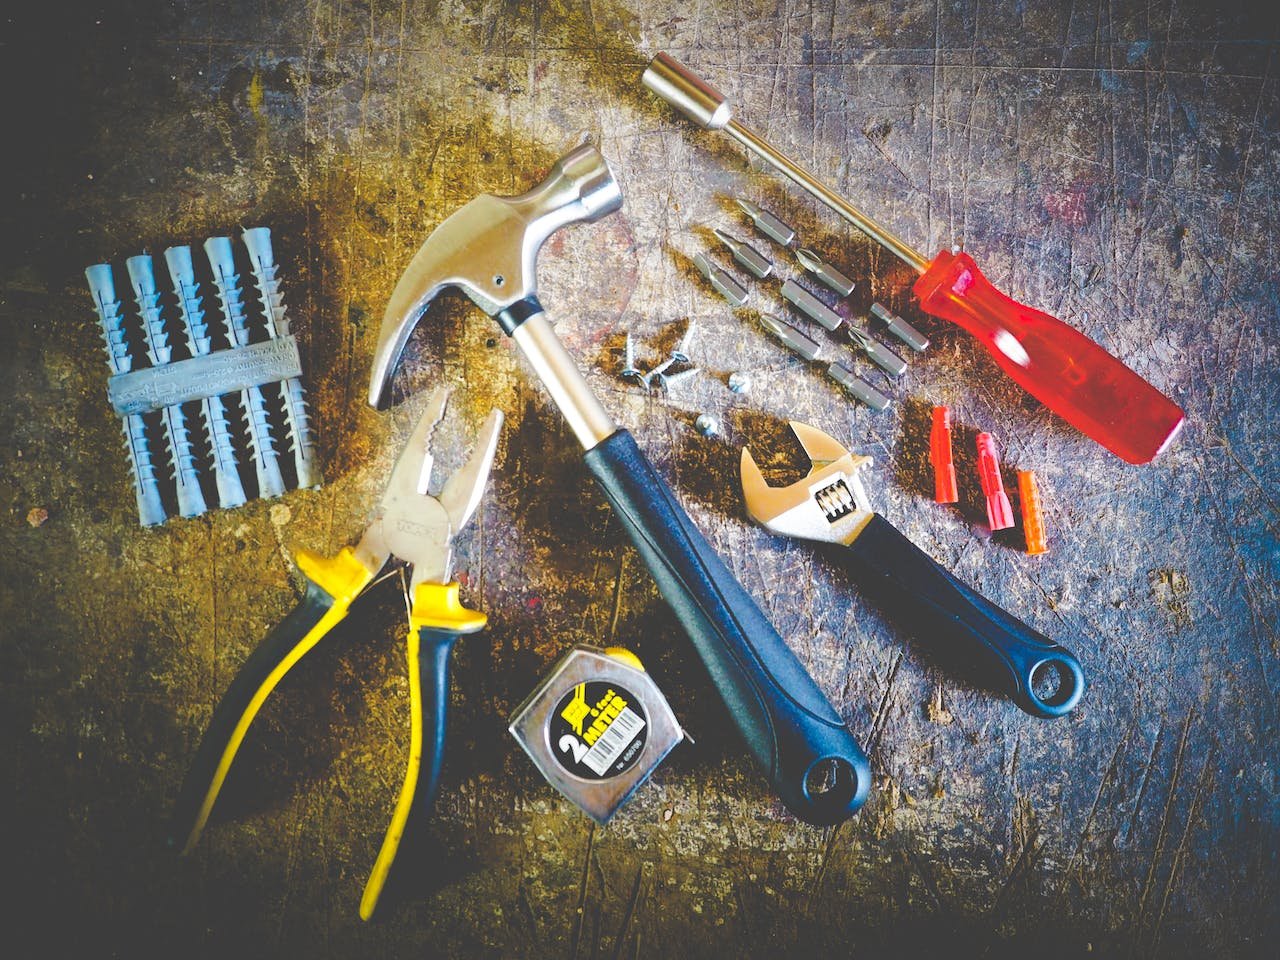 How To Buy Tools For Home Use